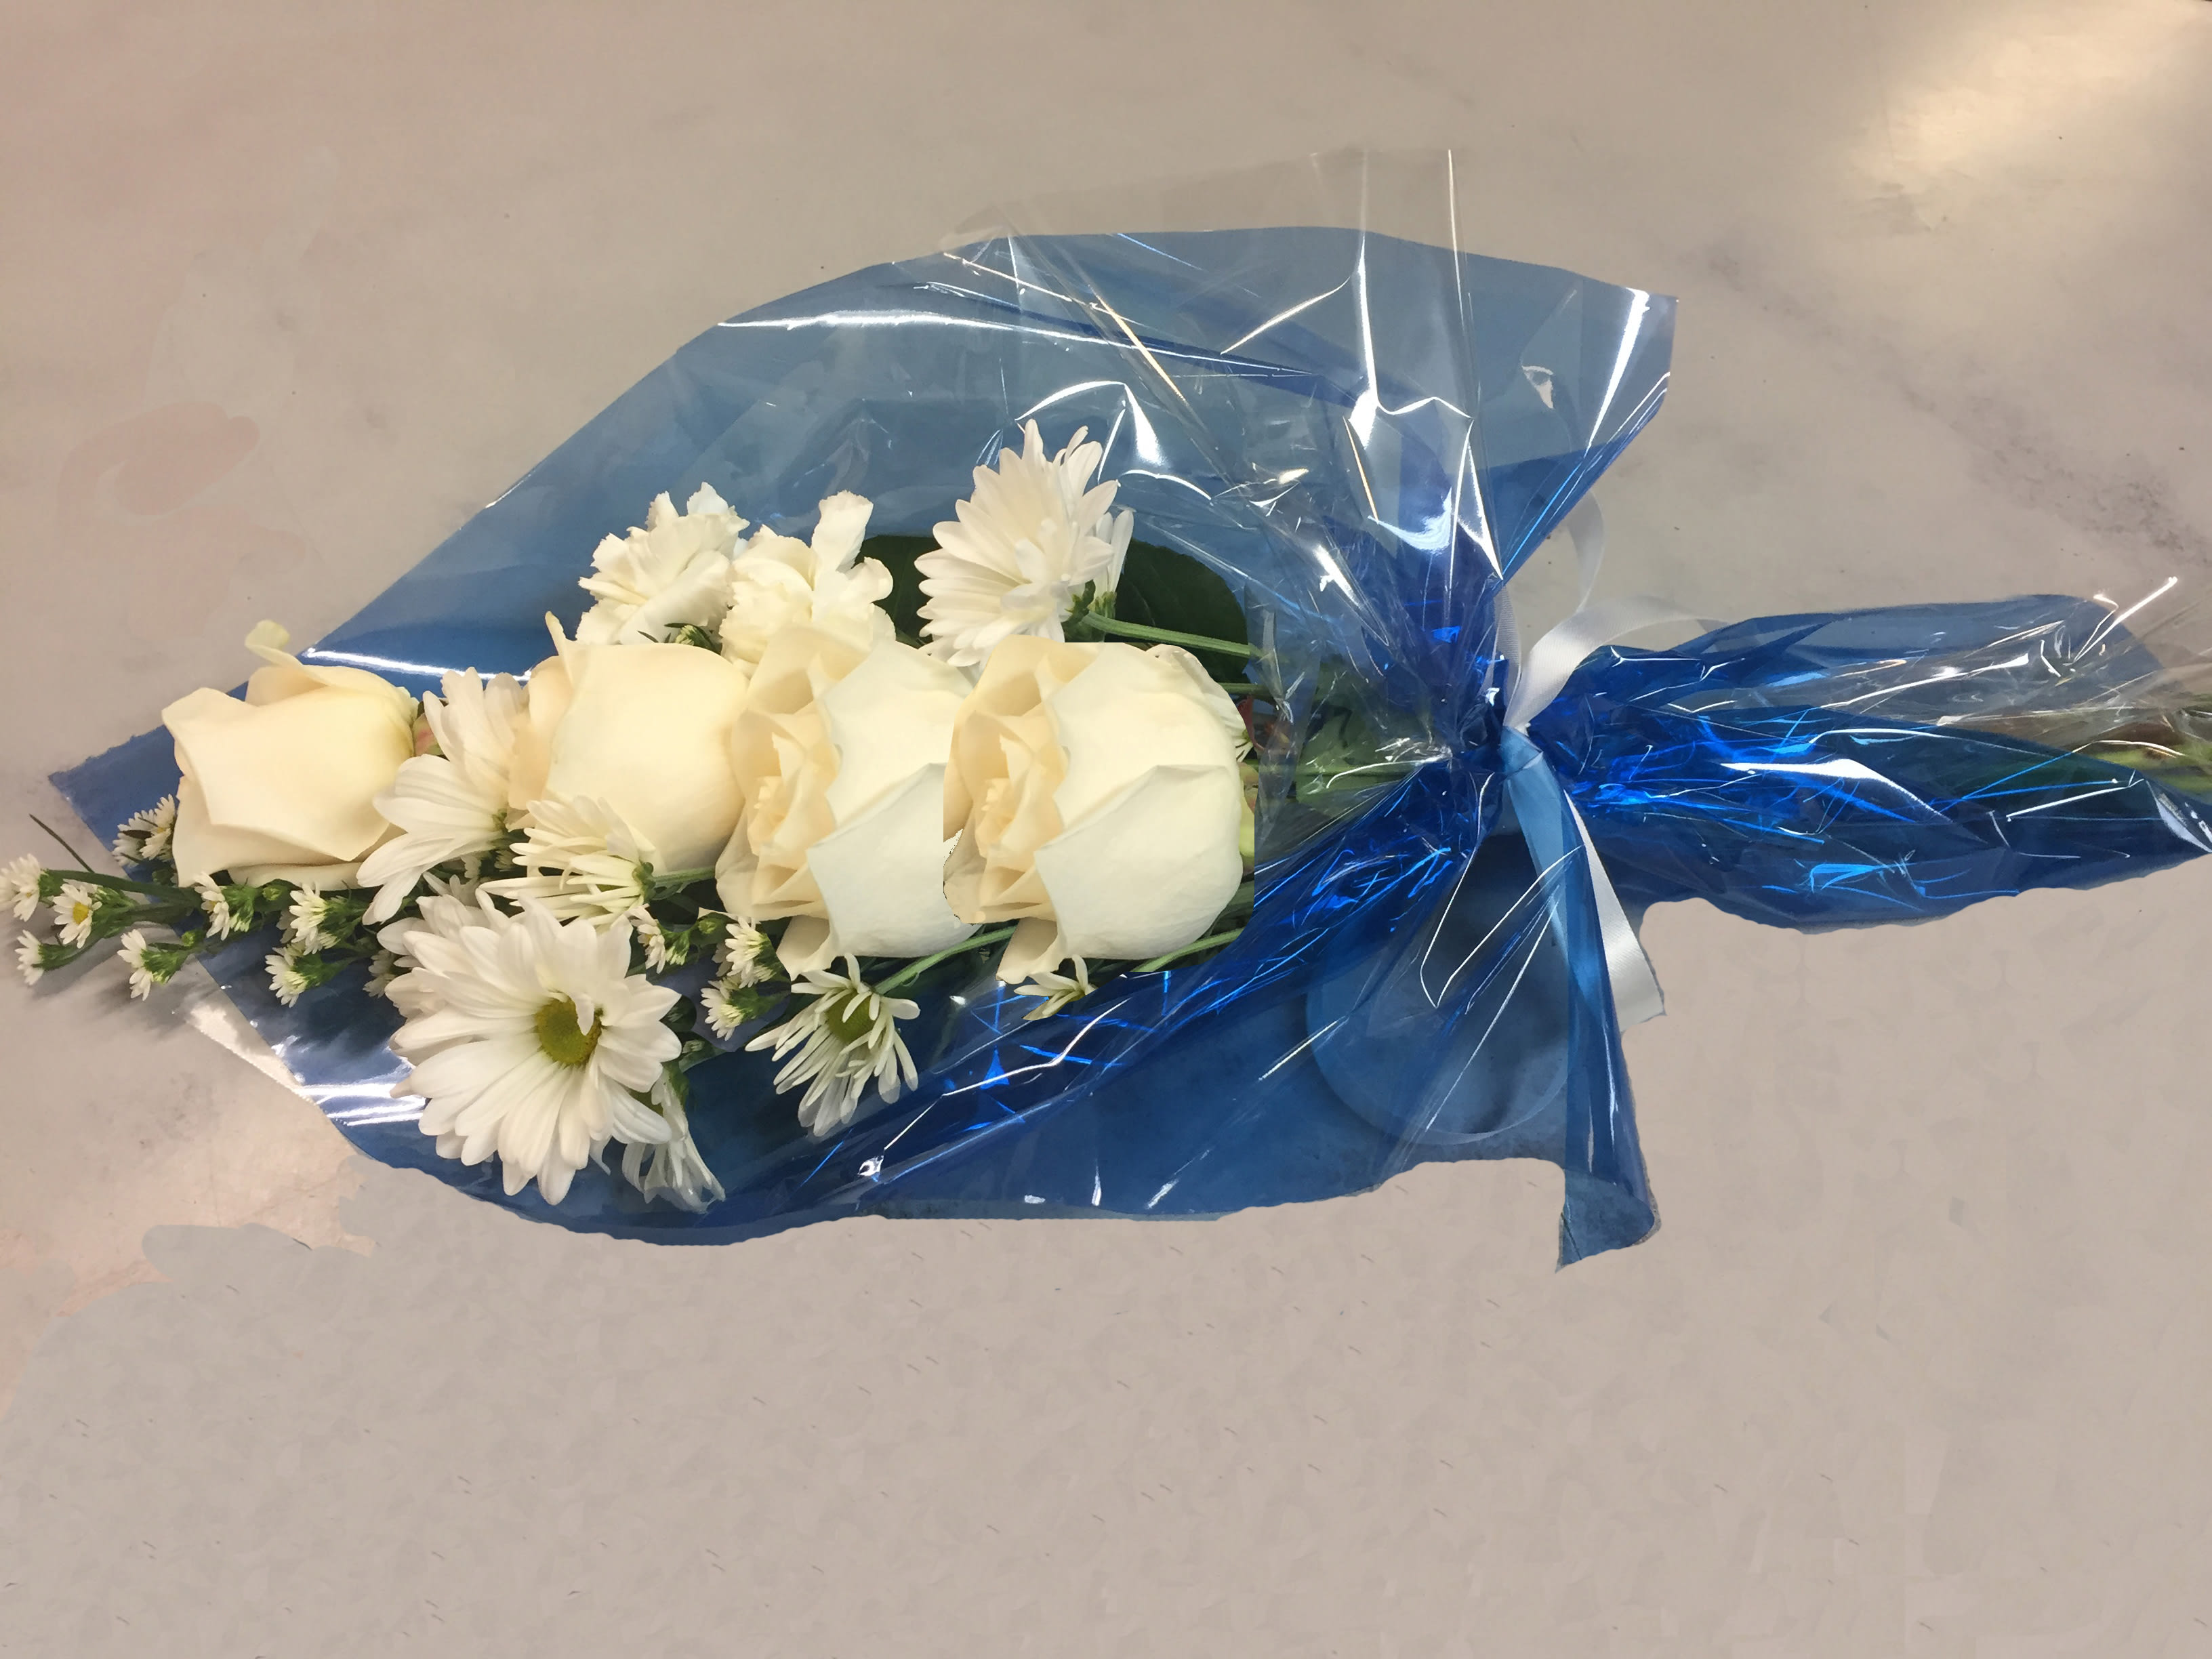 Simple Blue and White Wrap - Roses, daisies, carnations and Montecasino accented with greens, blue cellophane wrap and ribbon.